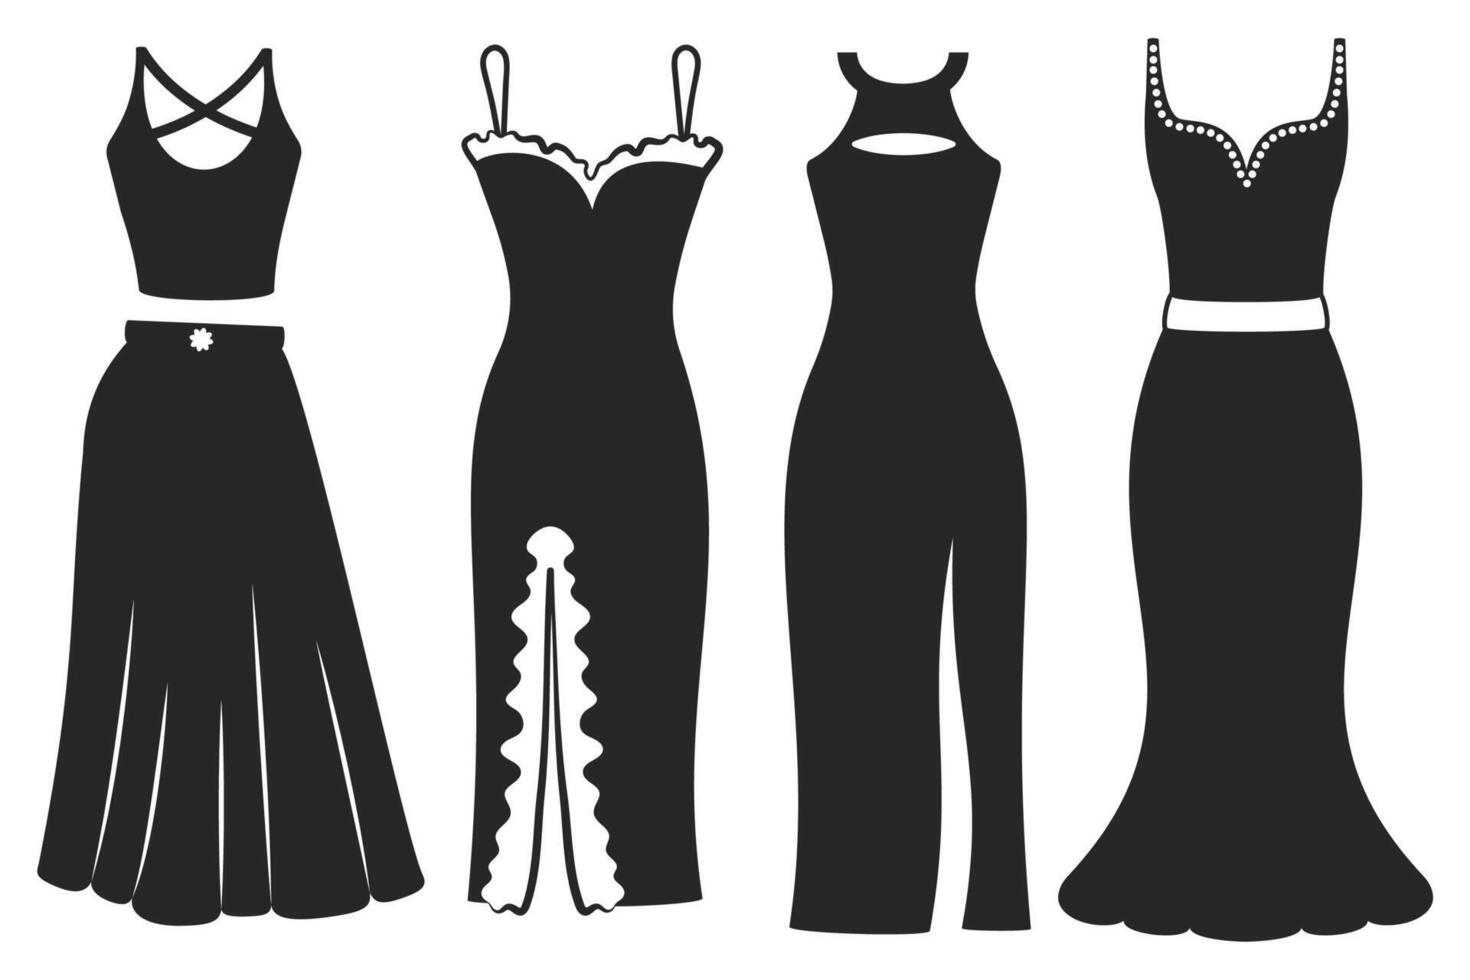 Set of black dress silhouette isolated. Classic luxury wear with jewelry. Elegant evening gown for glamorous evening and cocktail party. Modern design. Flat vector illustration